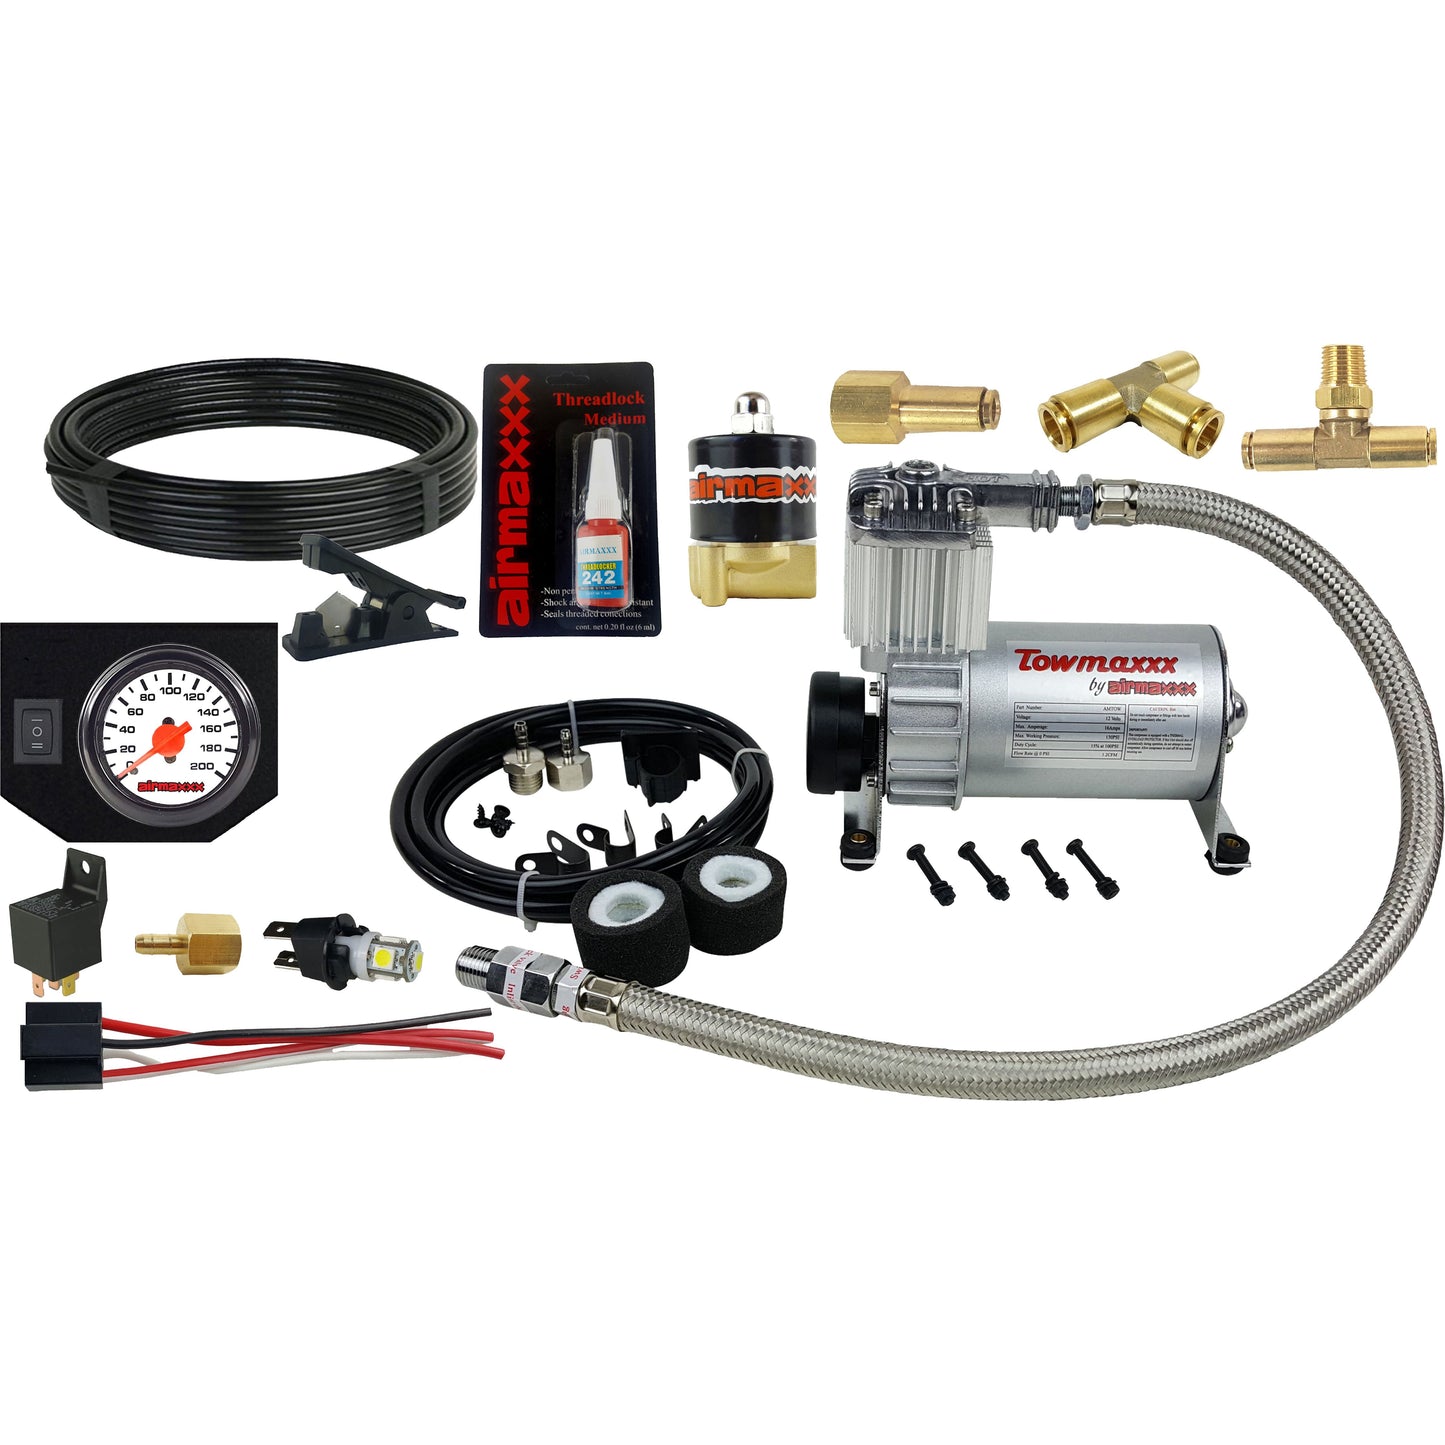 Tow Level Assist airmaxxx In Cab Control Electric Air Switch Kit & Gauge Panel